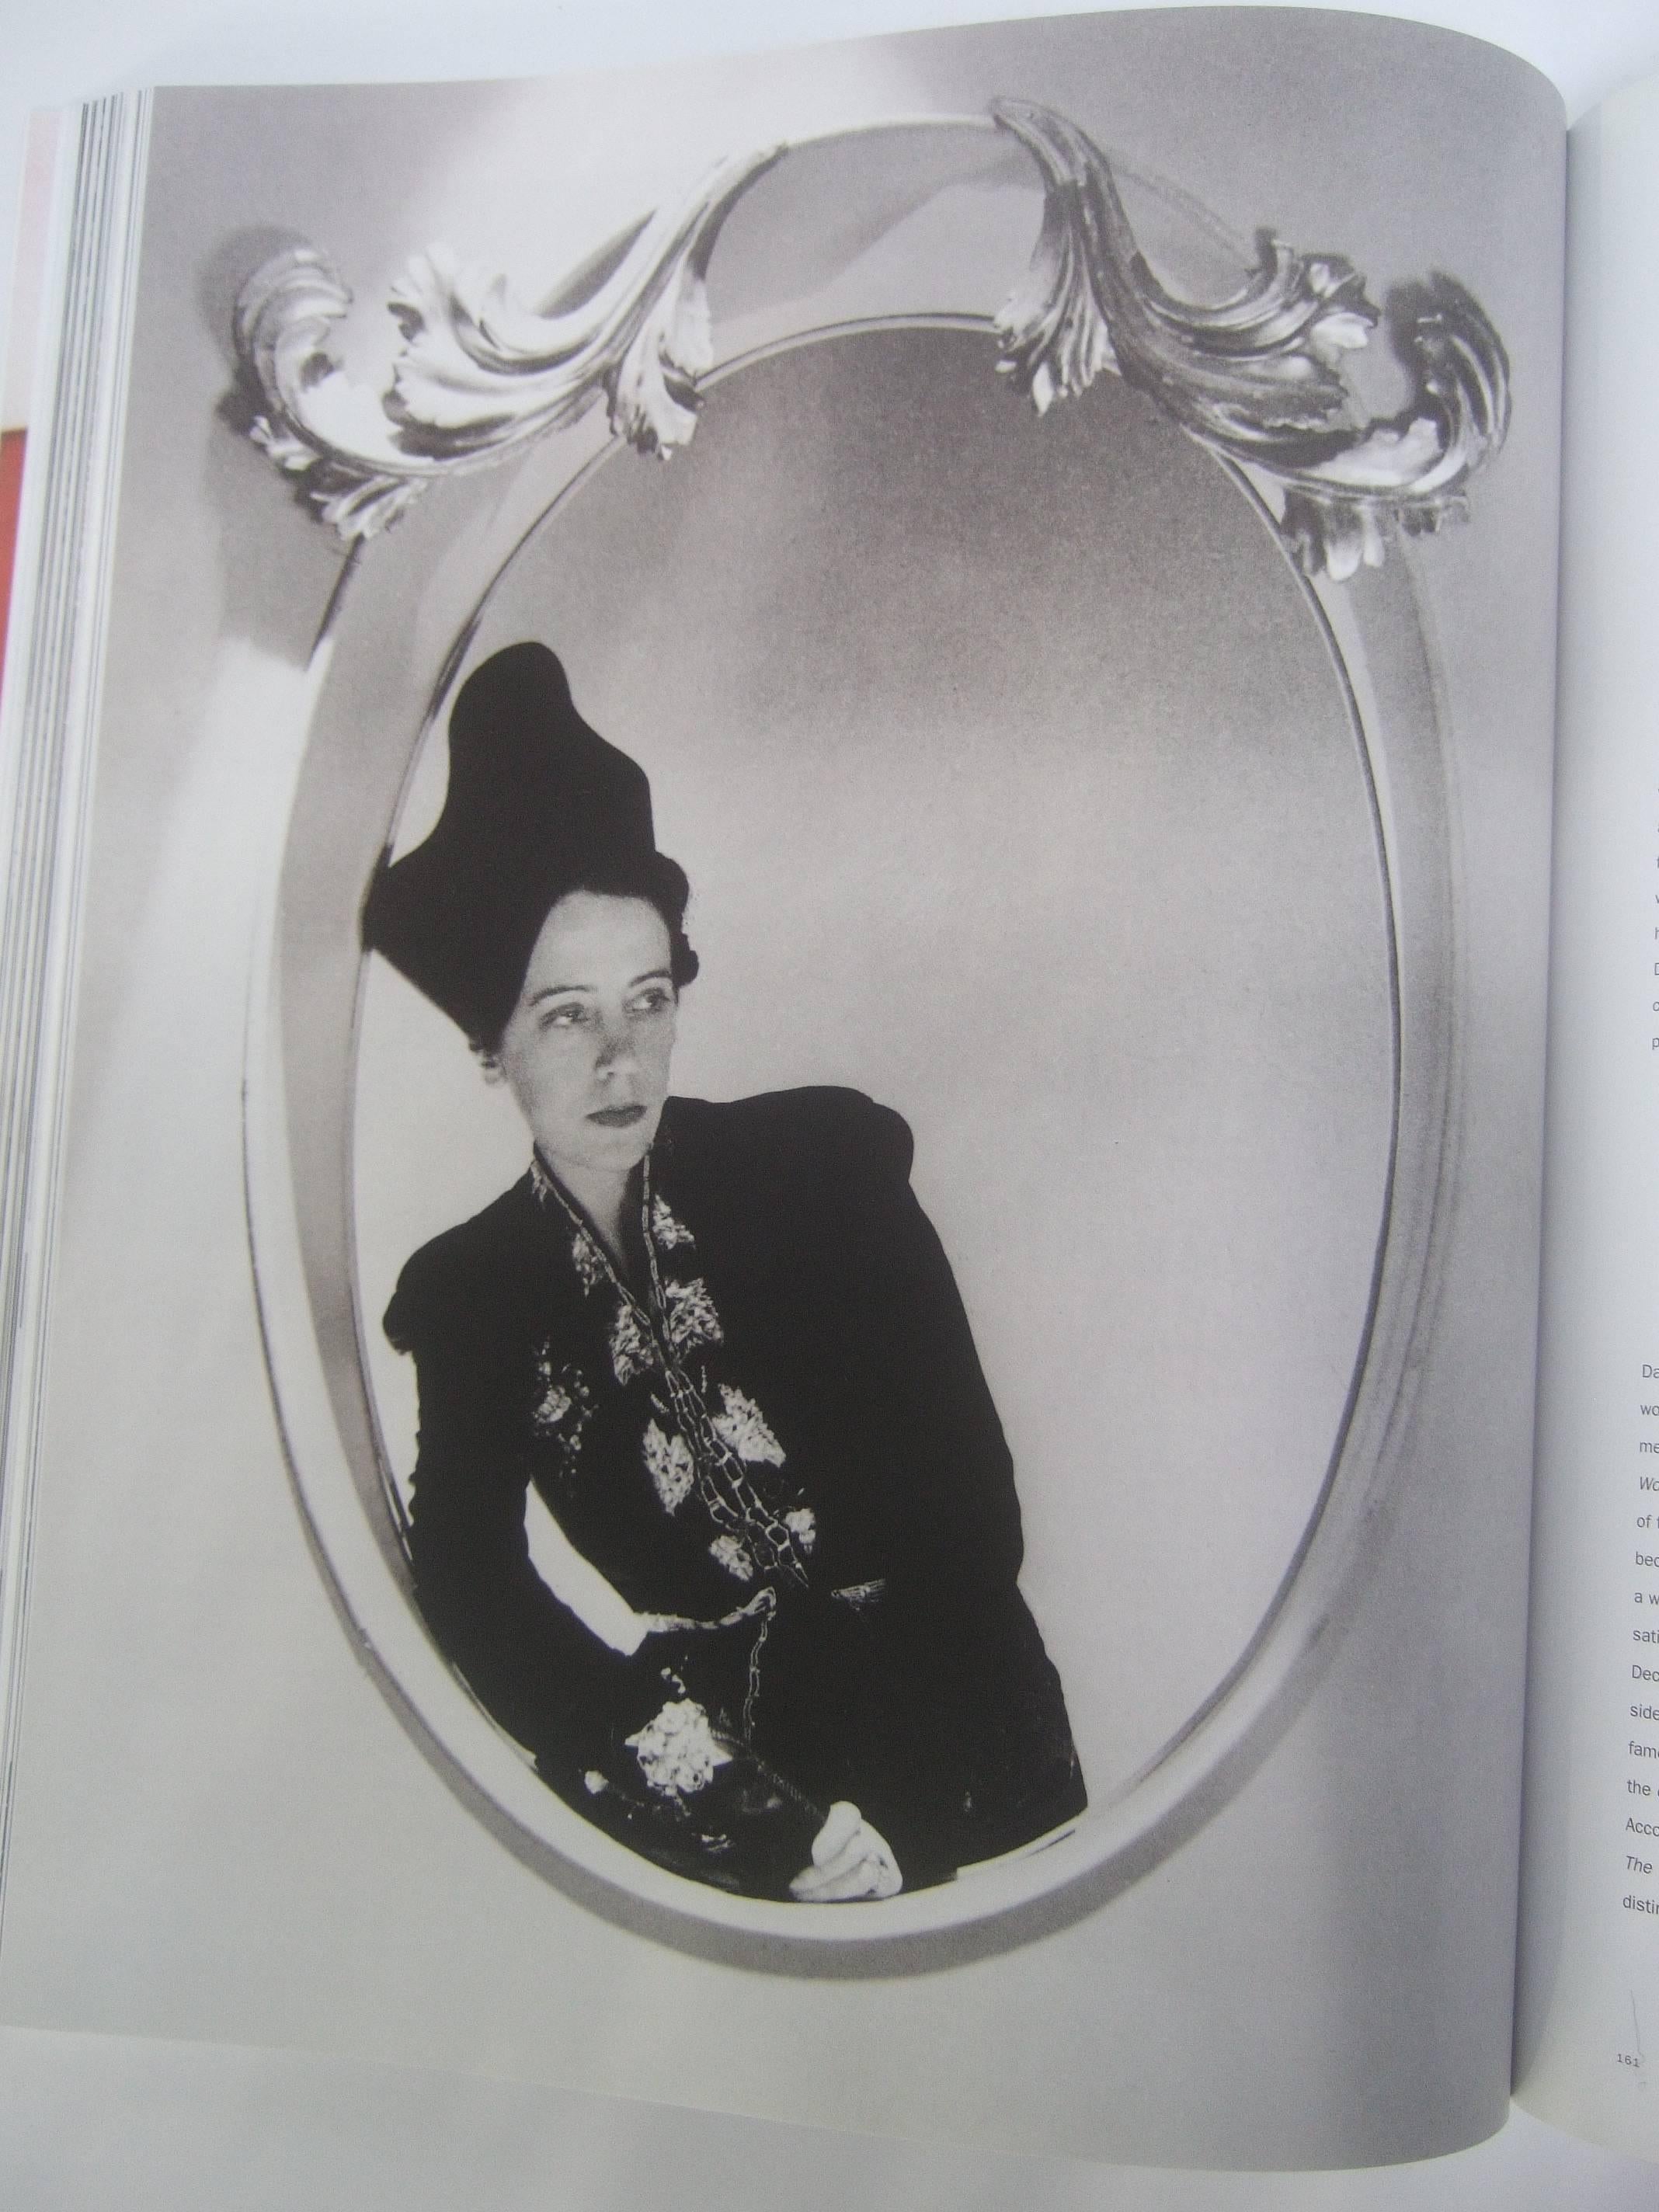 Schiaparelli Shocking The art & fashion reference book 
The book is an archive of Schiaparelli's avant-garde 
edgy innovative fashions. The text provides a glimpse 
into her interesting life; shows her design evolution
and collaborations with